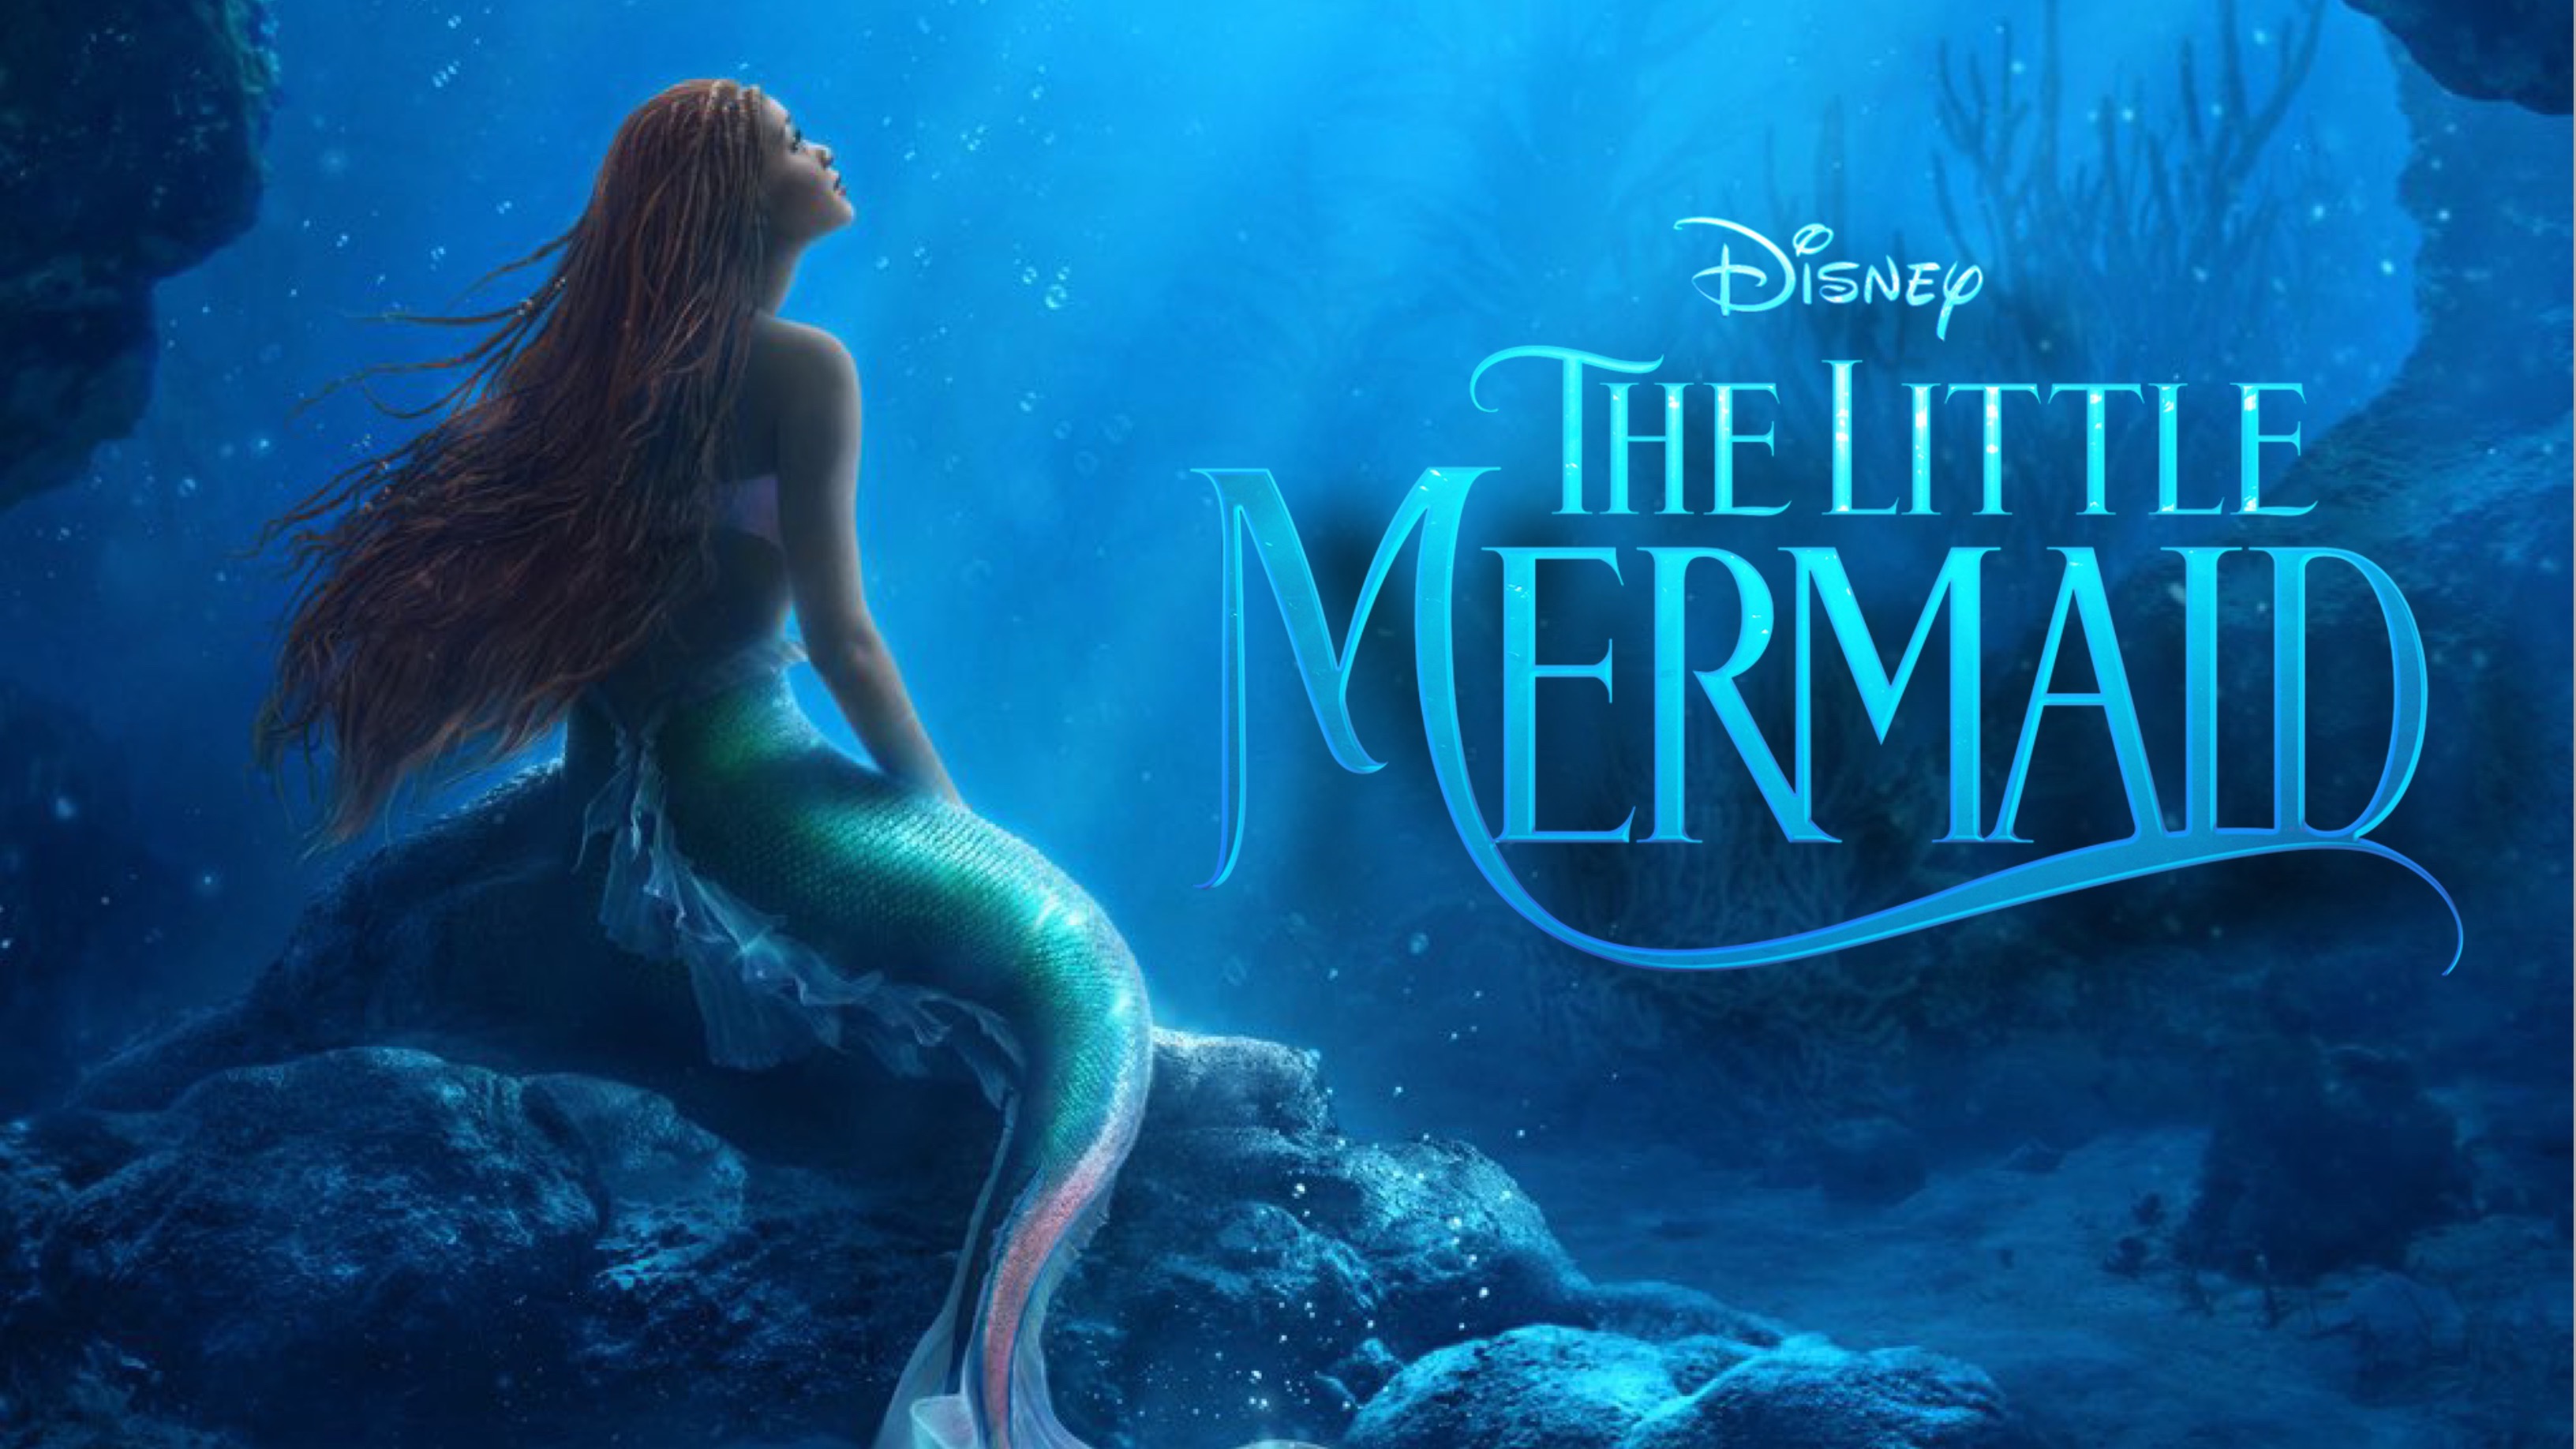 Halle Bailey Shares The First Poster For ‘The Little Mermaid’